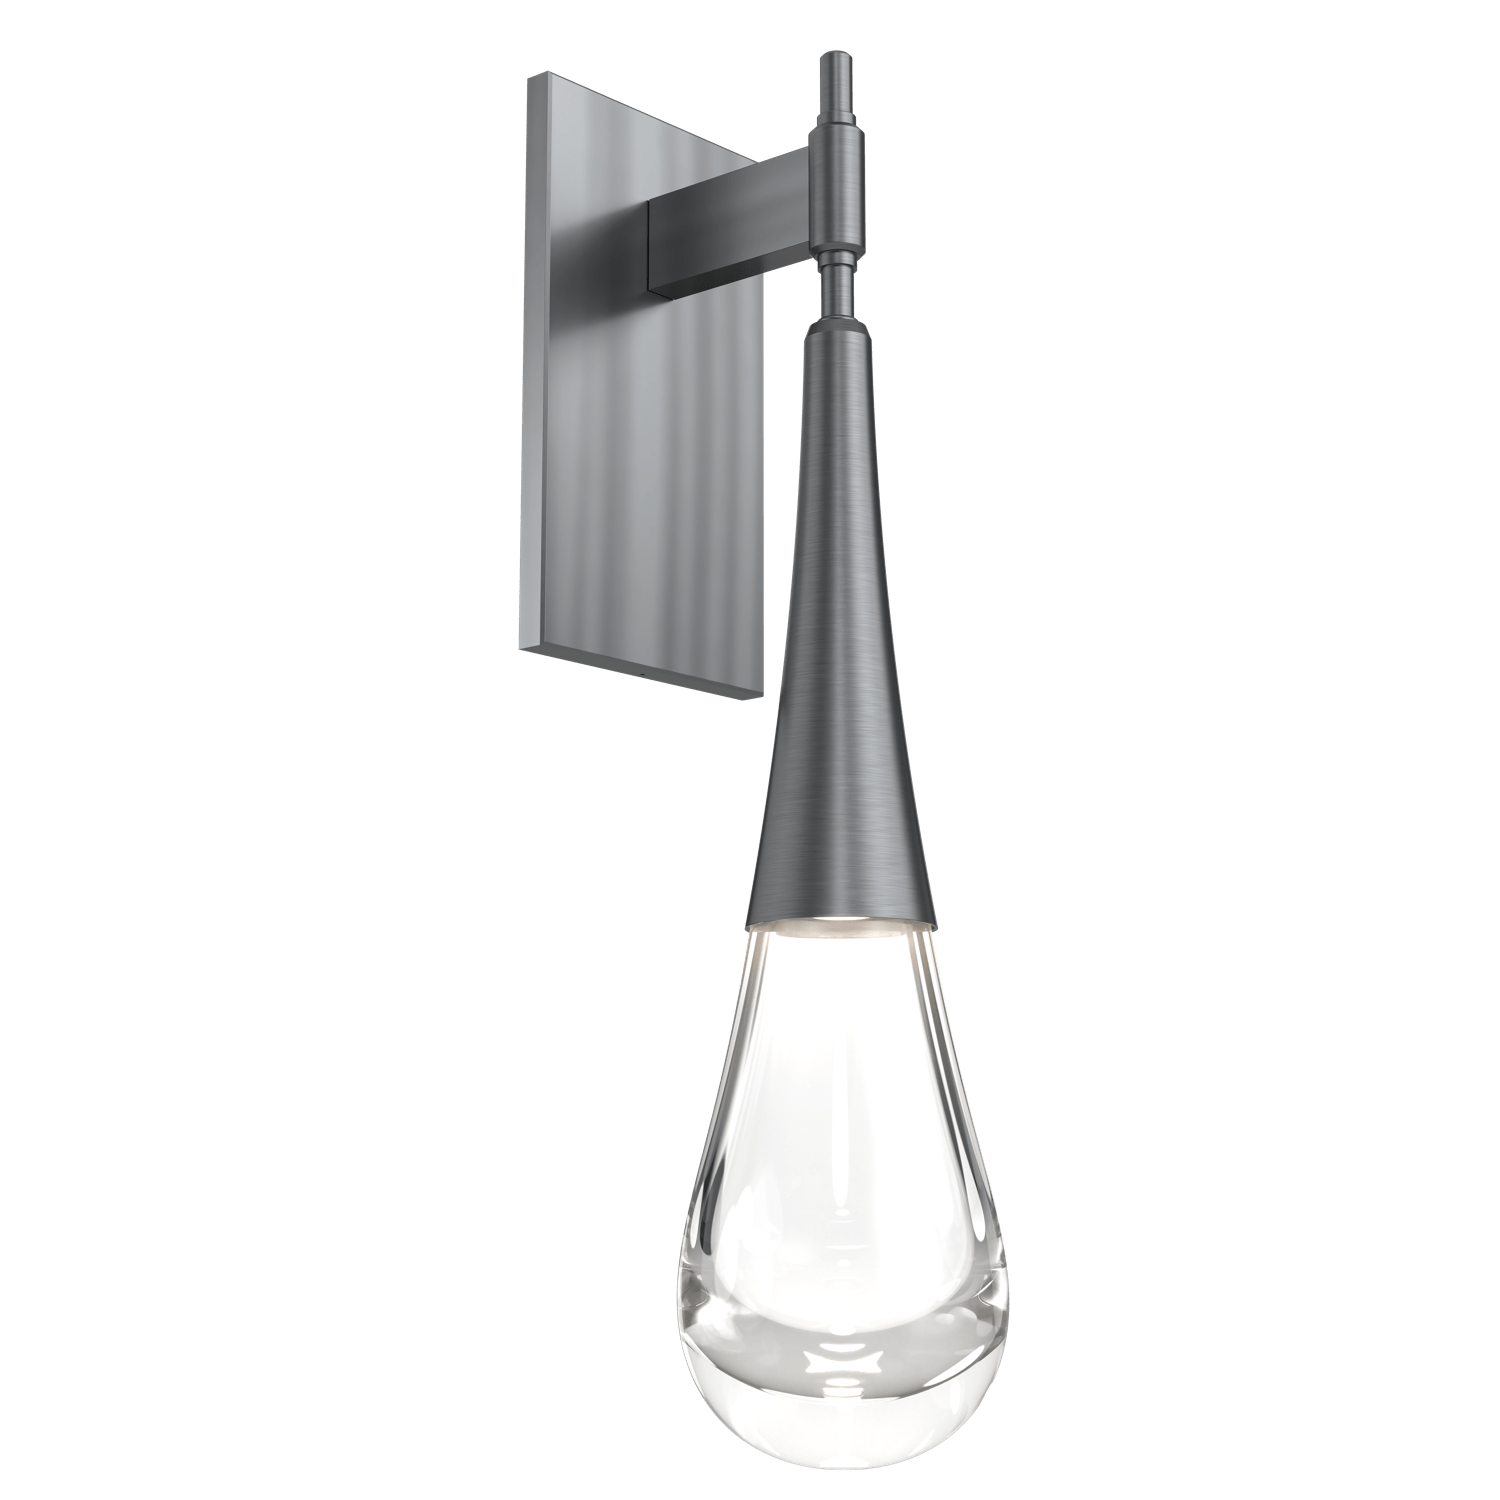 IDB0078-01-GM-Hammerton-Studio-Raindrop-wall-sconce-with-gunmetal-finish-and-clear-blown-glass-shades-and-LED-lamping